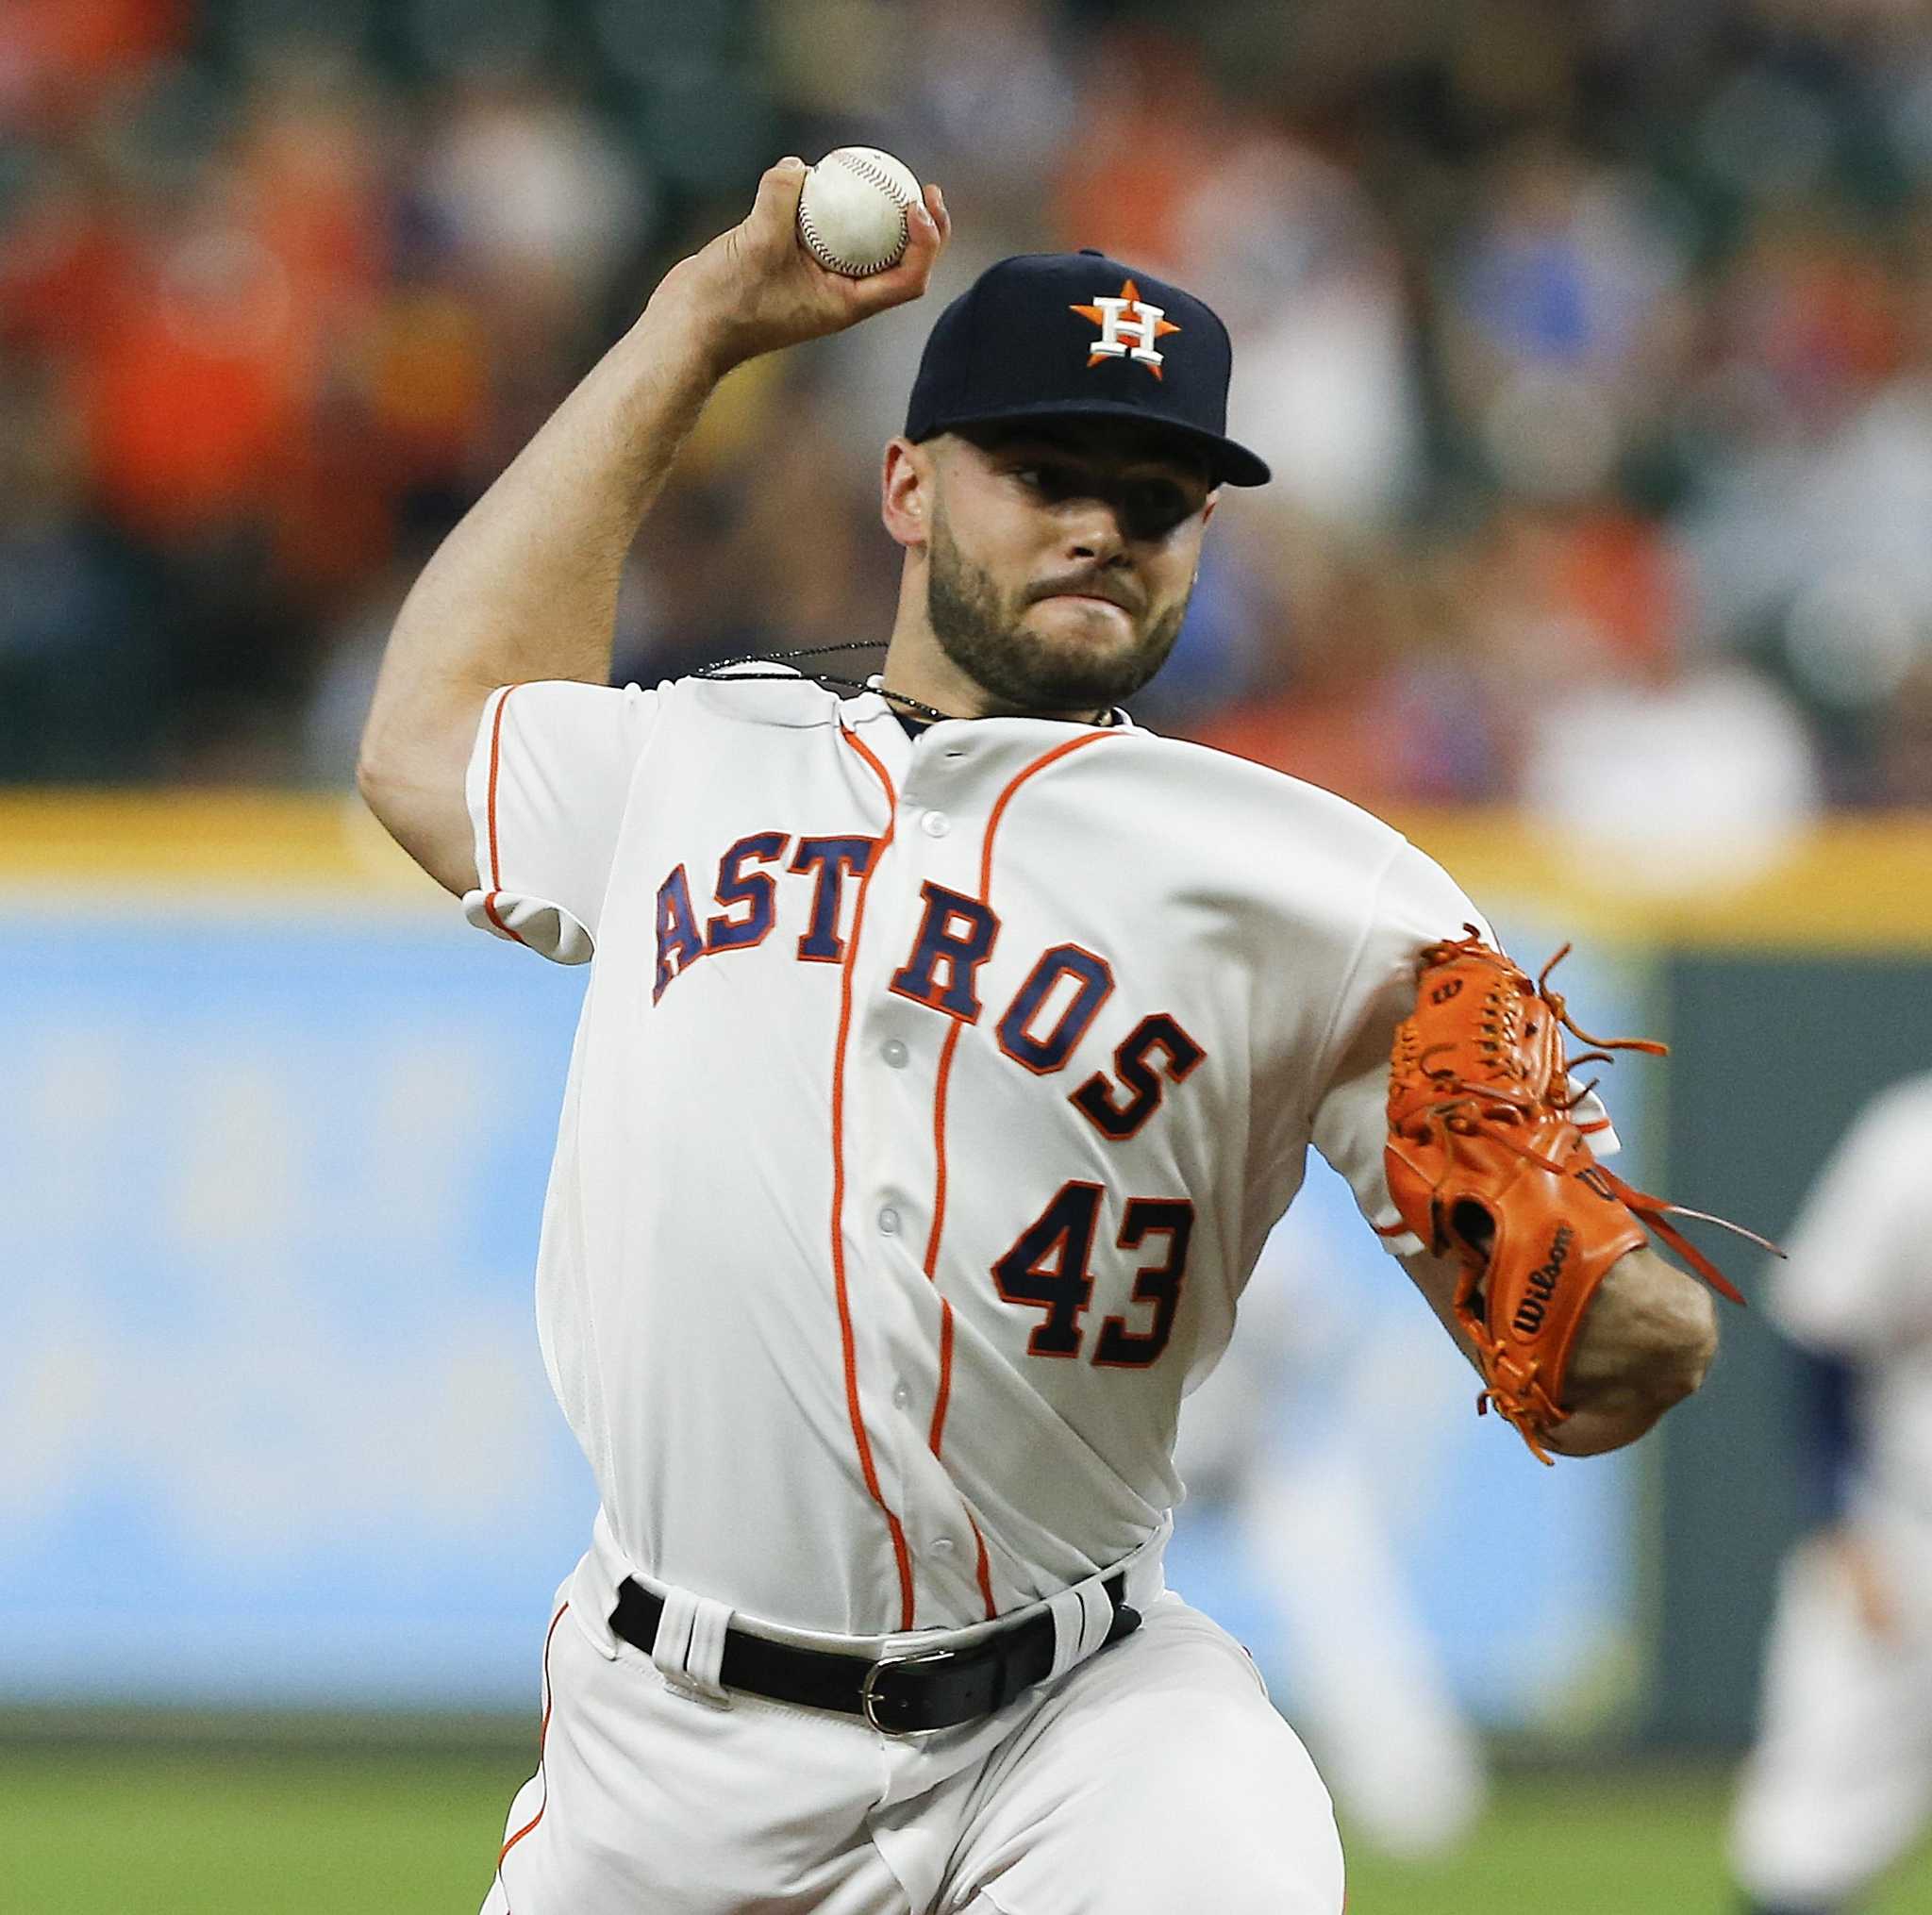 Check out Lance McCullers Jr.'s new look!